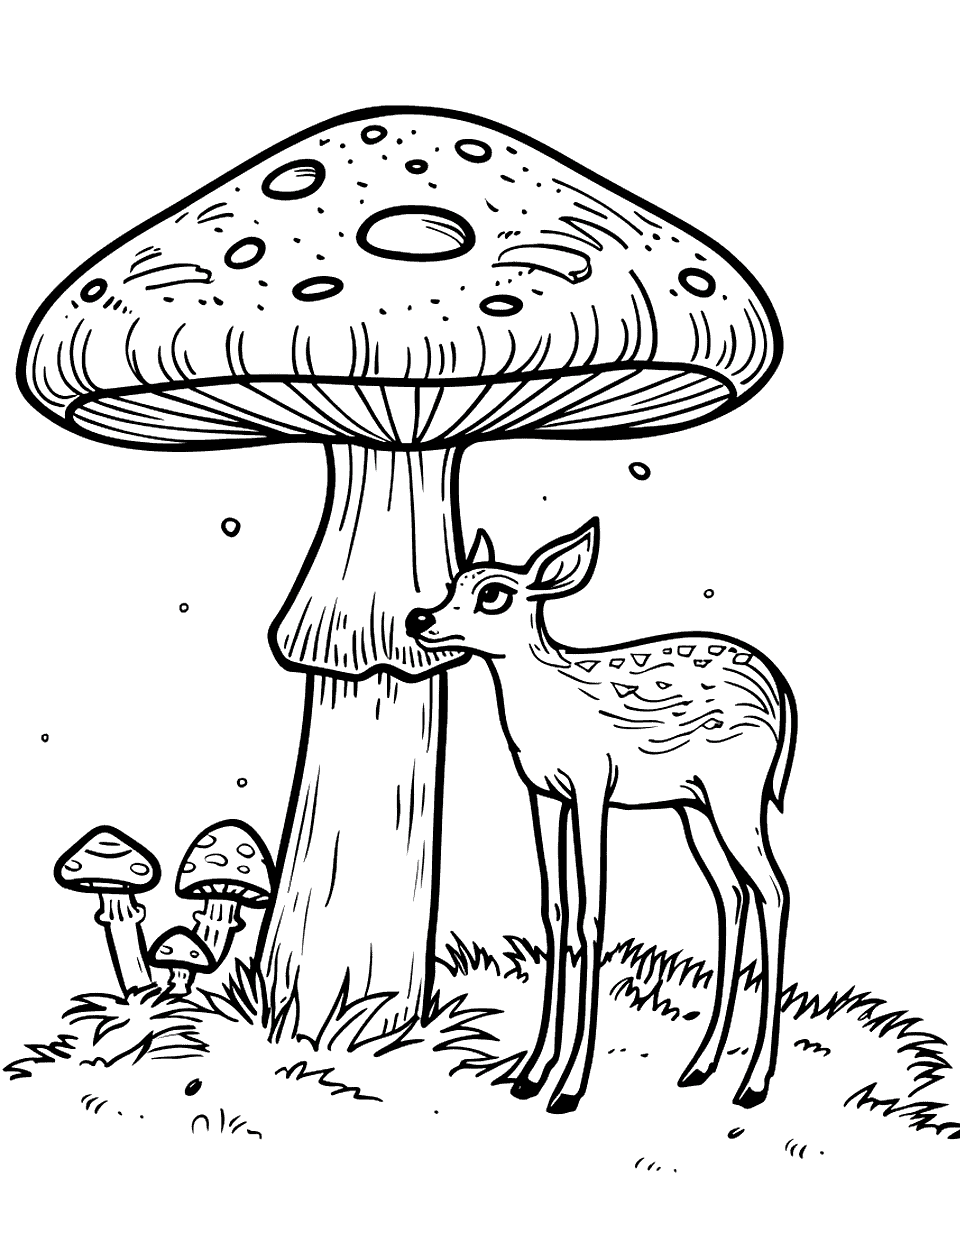 Forest Animals and a Mushroom Coloring Page - A single forest animal, like a deer, standing near a large mushroom.